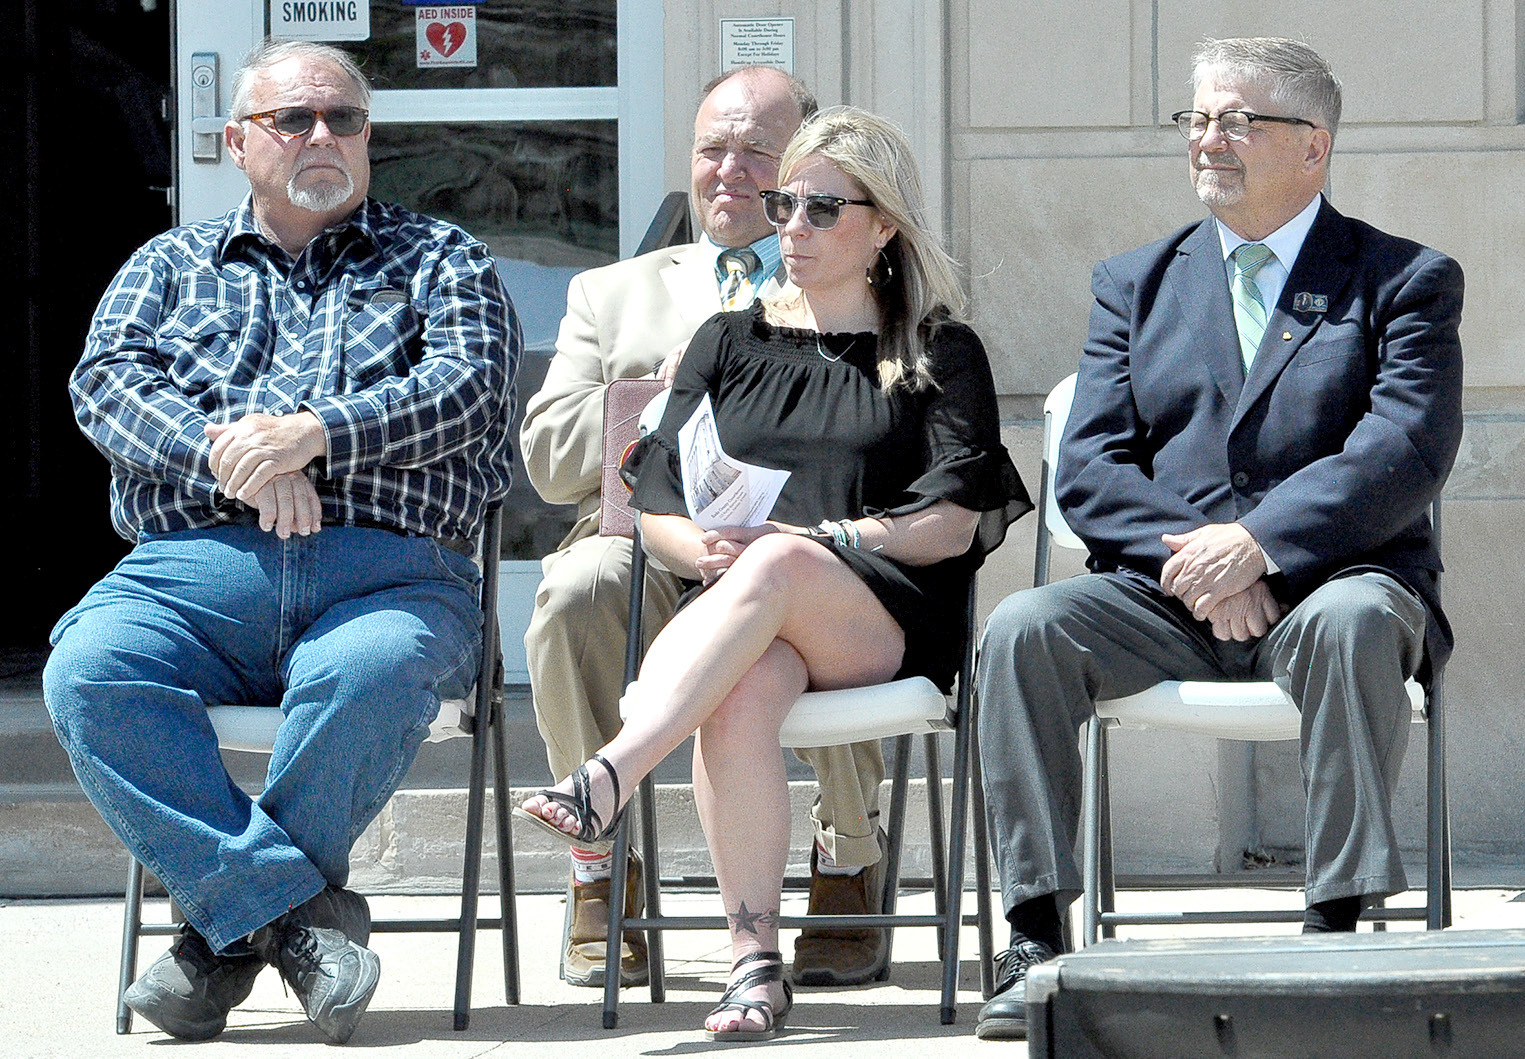 Rooks County Commissioners Tim Berland, Kayla Hilbrink and John Ruder, sitting with Magistrate Judge Doug Bigge (behind)